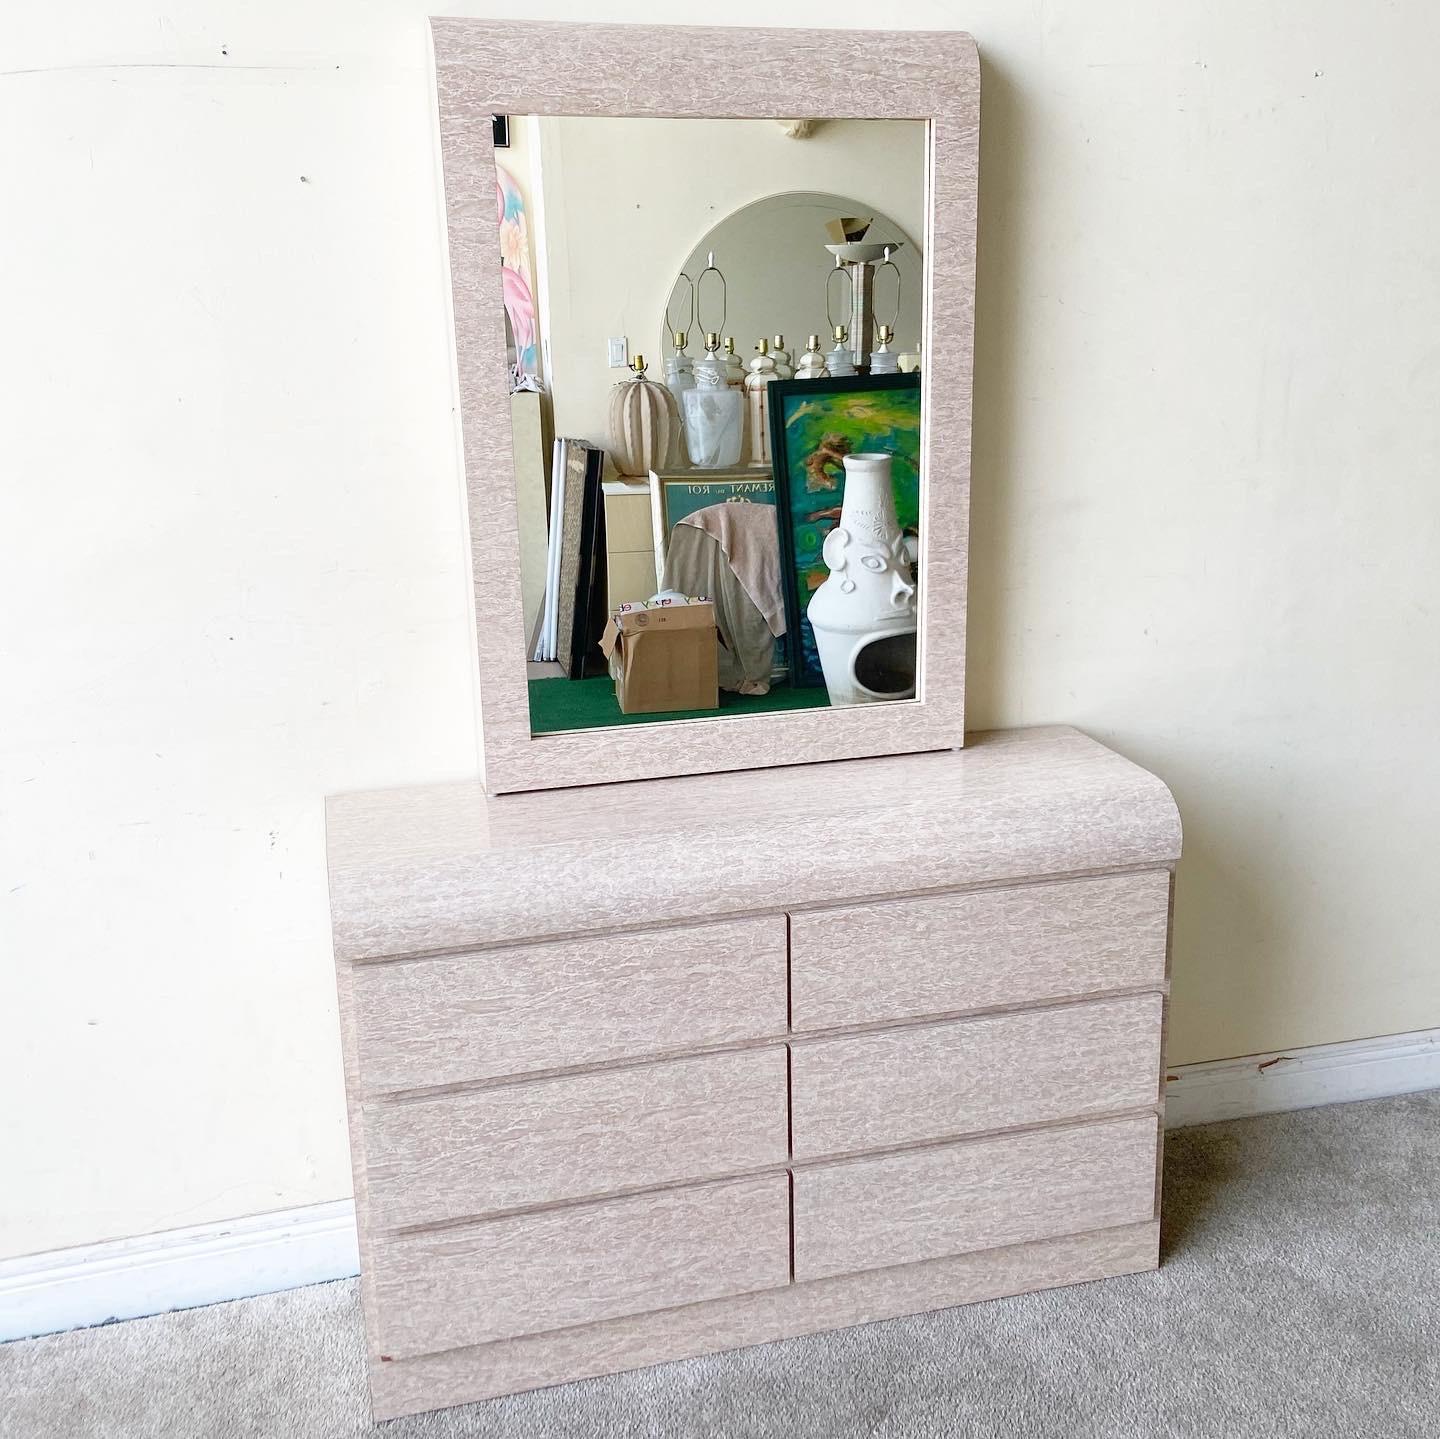 Amazing 1980s postmodern waterfall dresser with matching mirror. Features a tan/beige faux marble laminate with 6 spacious drawers. Dresser measures 48”W, 15.5”D, Mirror measures: 30.25”W, 4”D, 42.5”H